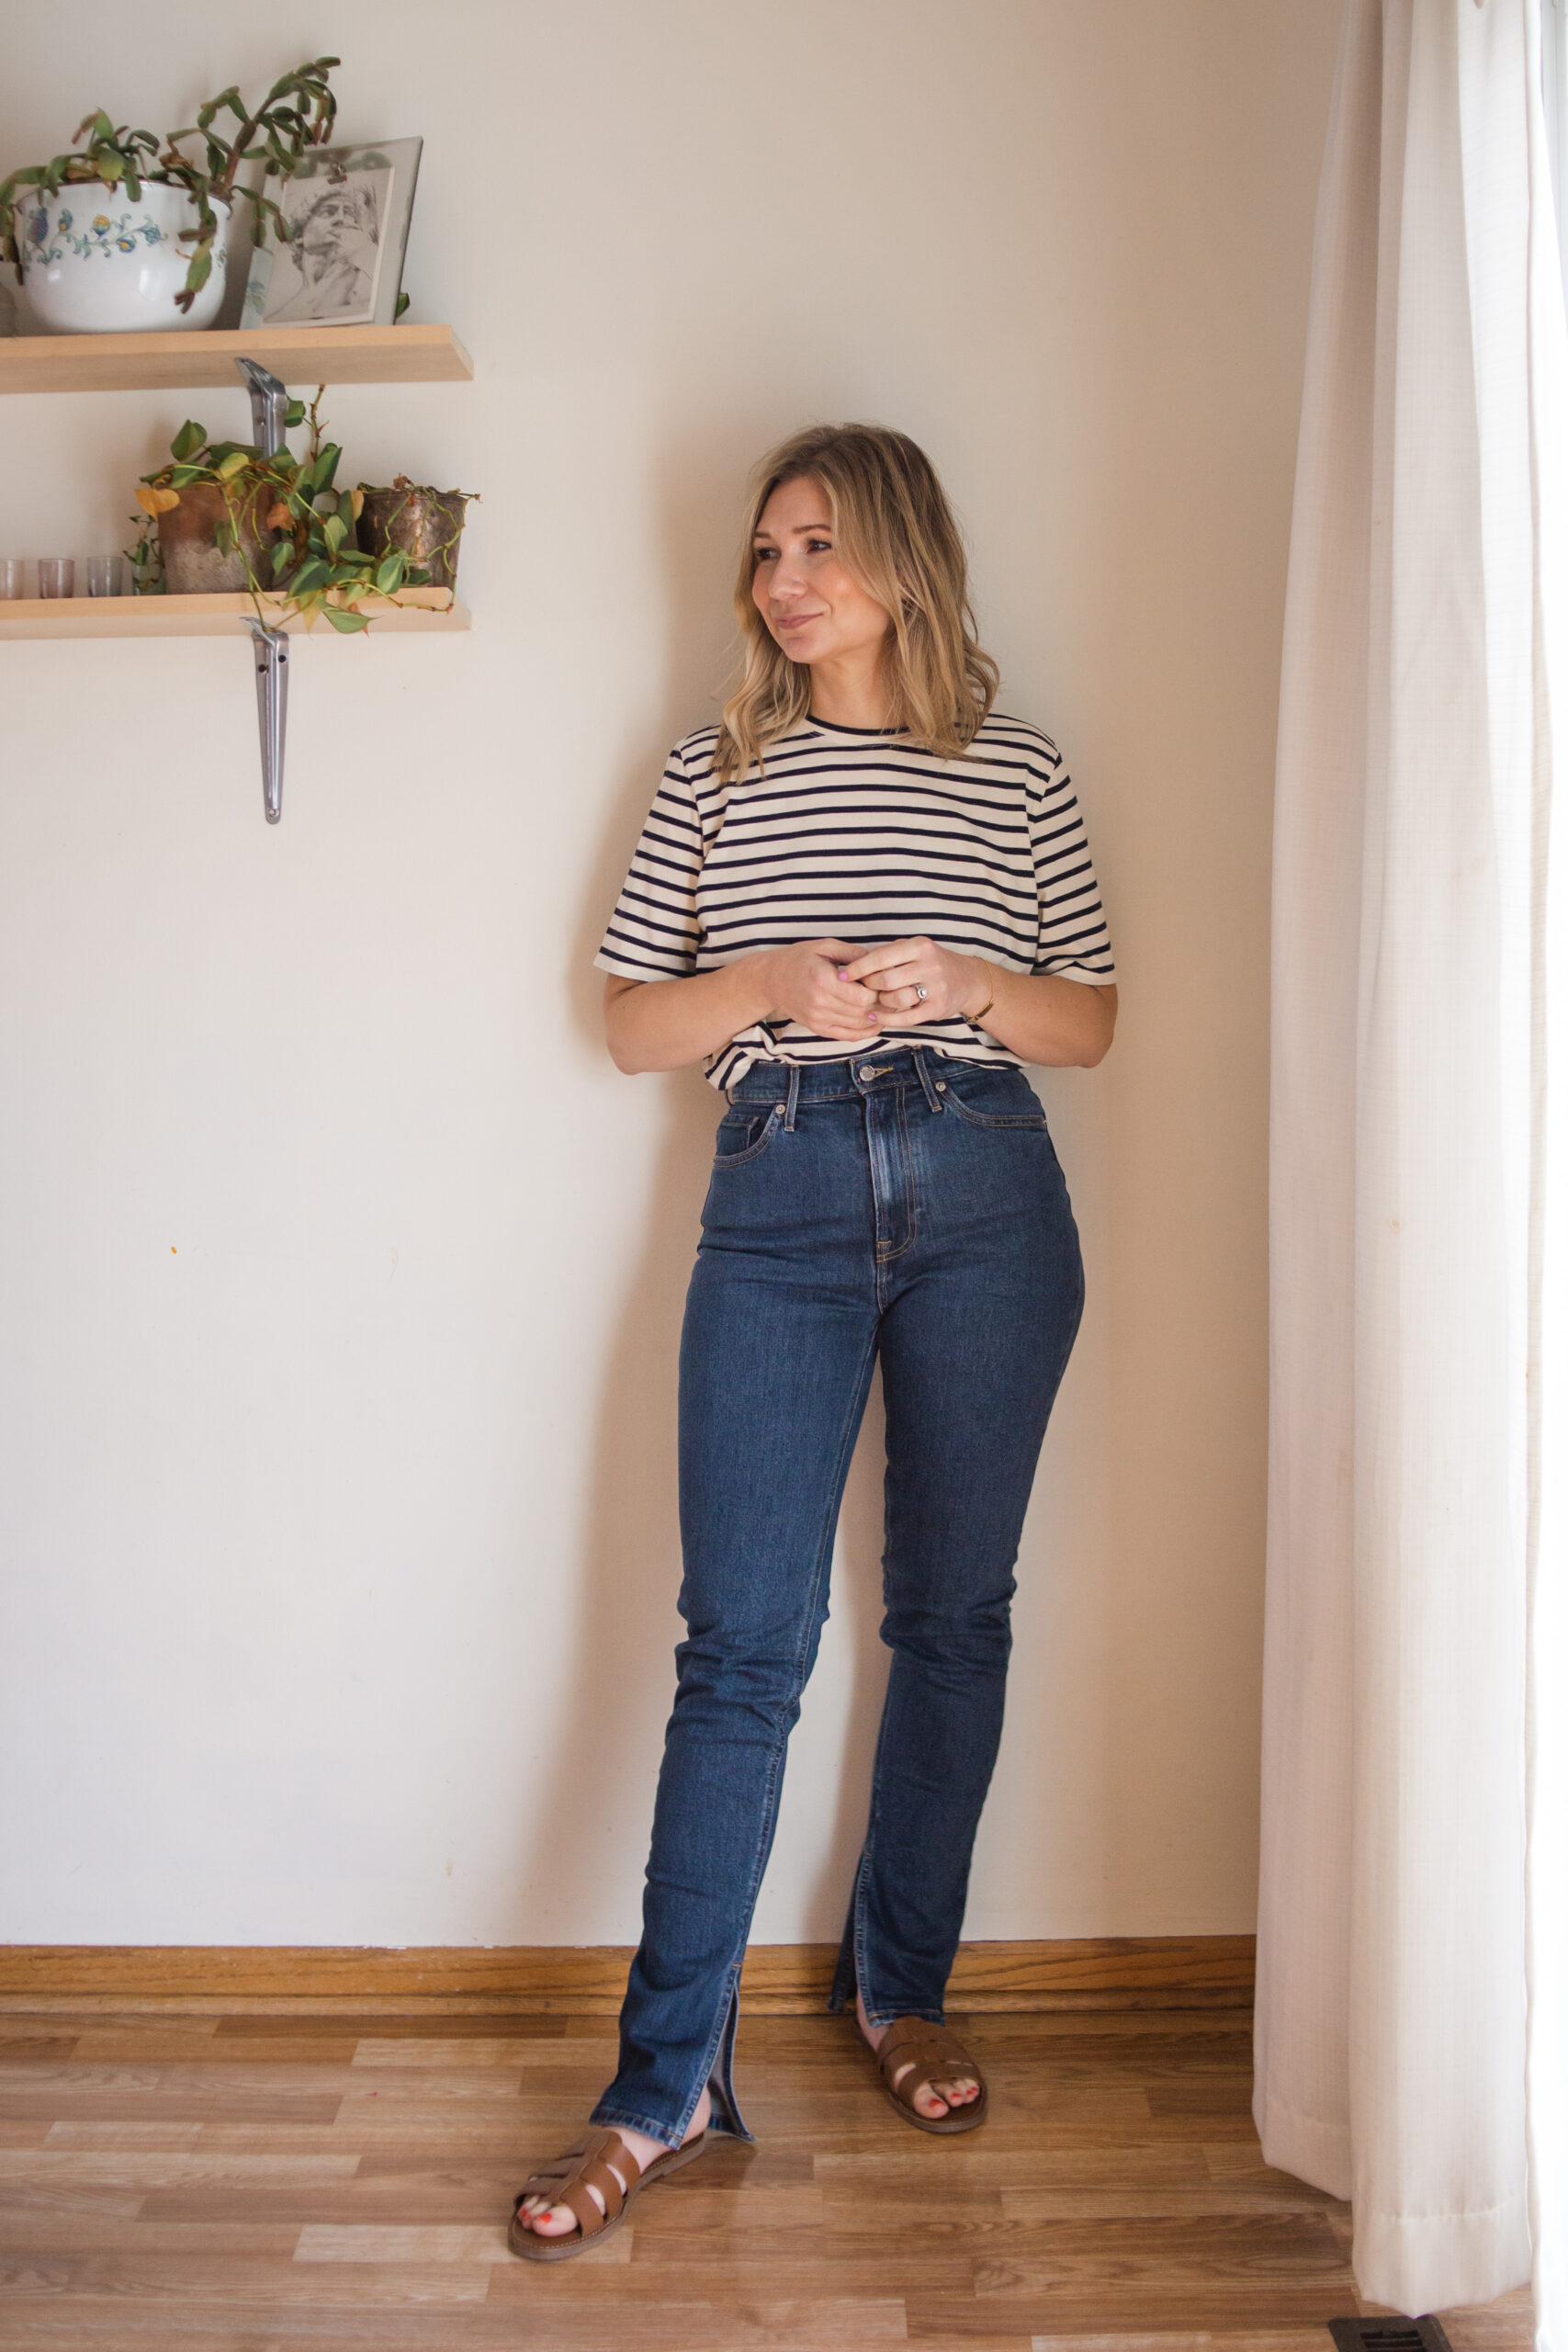 Karin Emily wears a black and white striped tee, everlane cheeky split hem jeans, and brown sandals